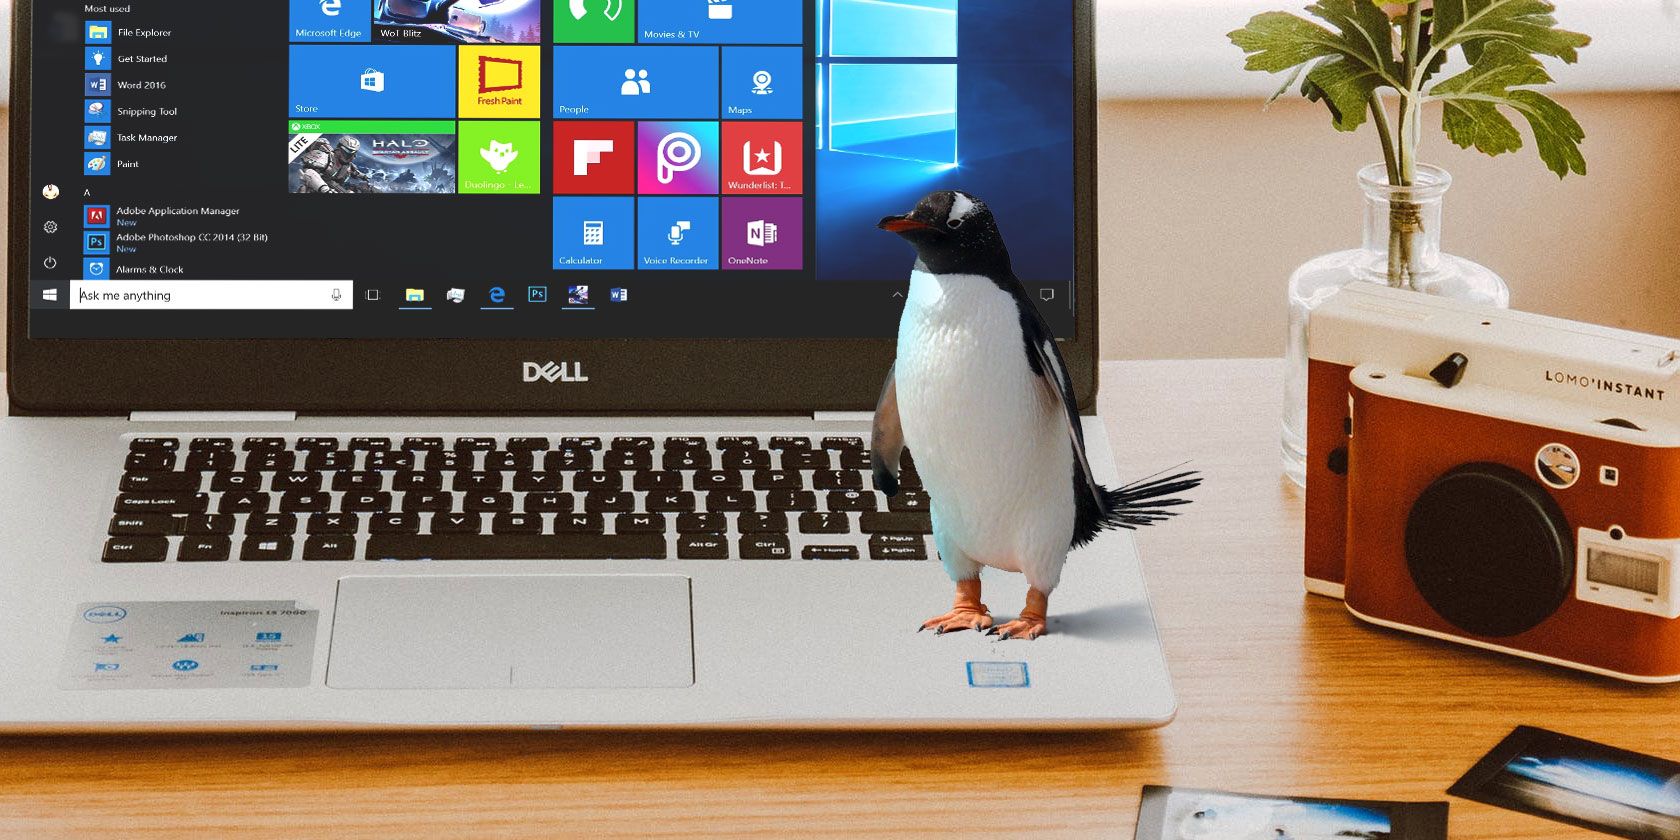 How to Transfer and Share Files Between Windows and Linux